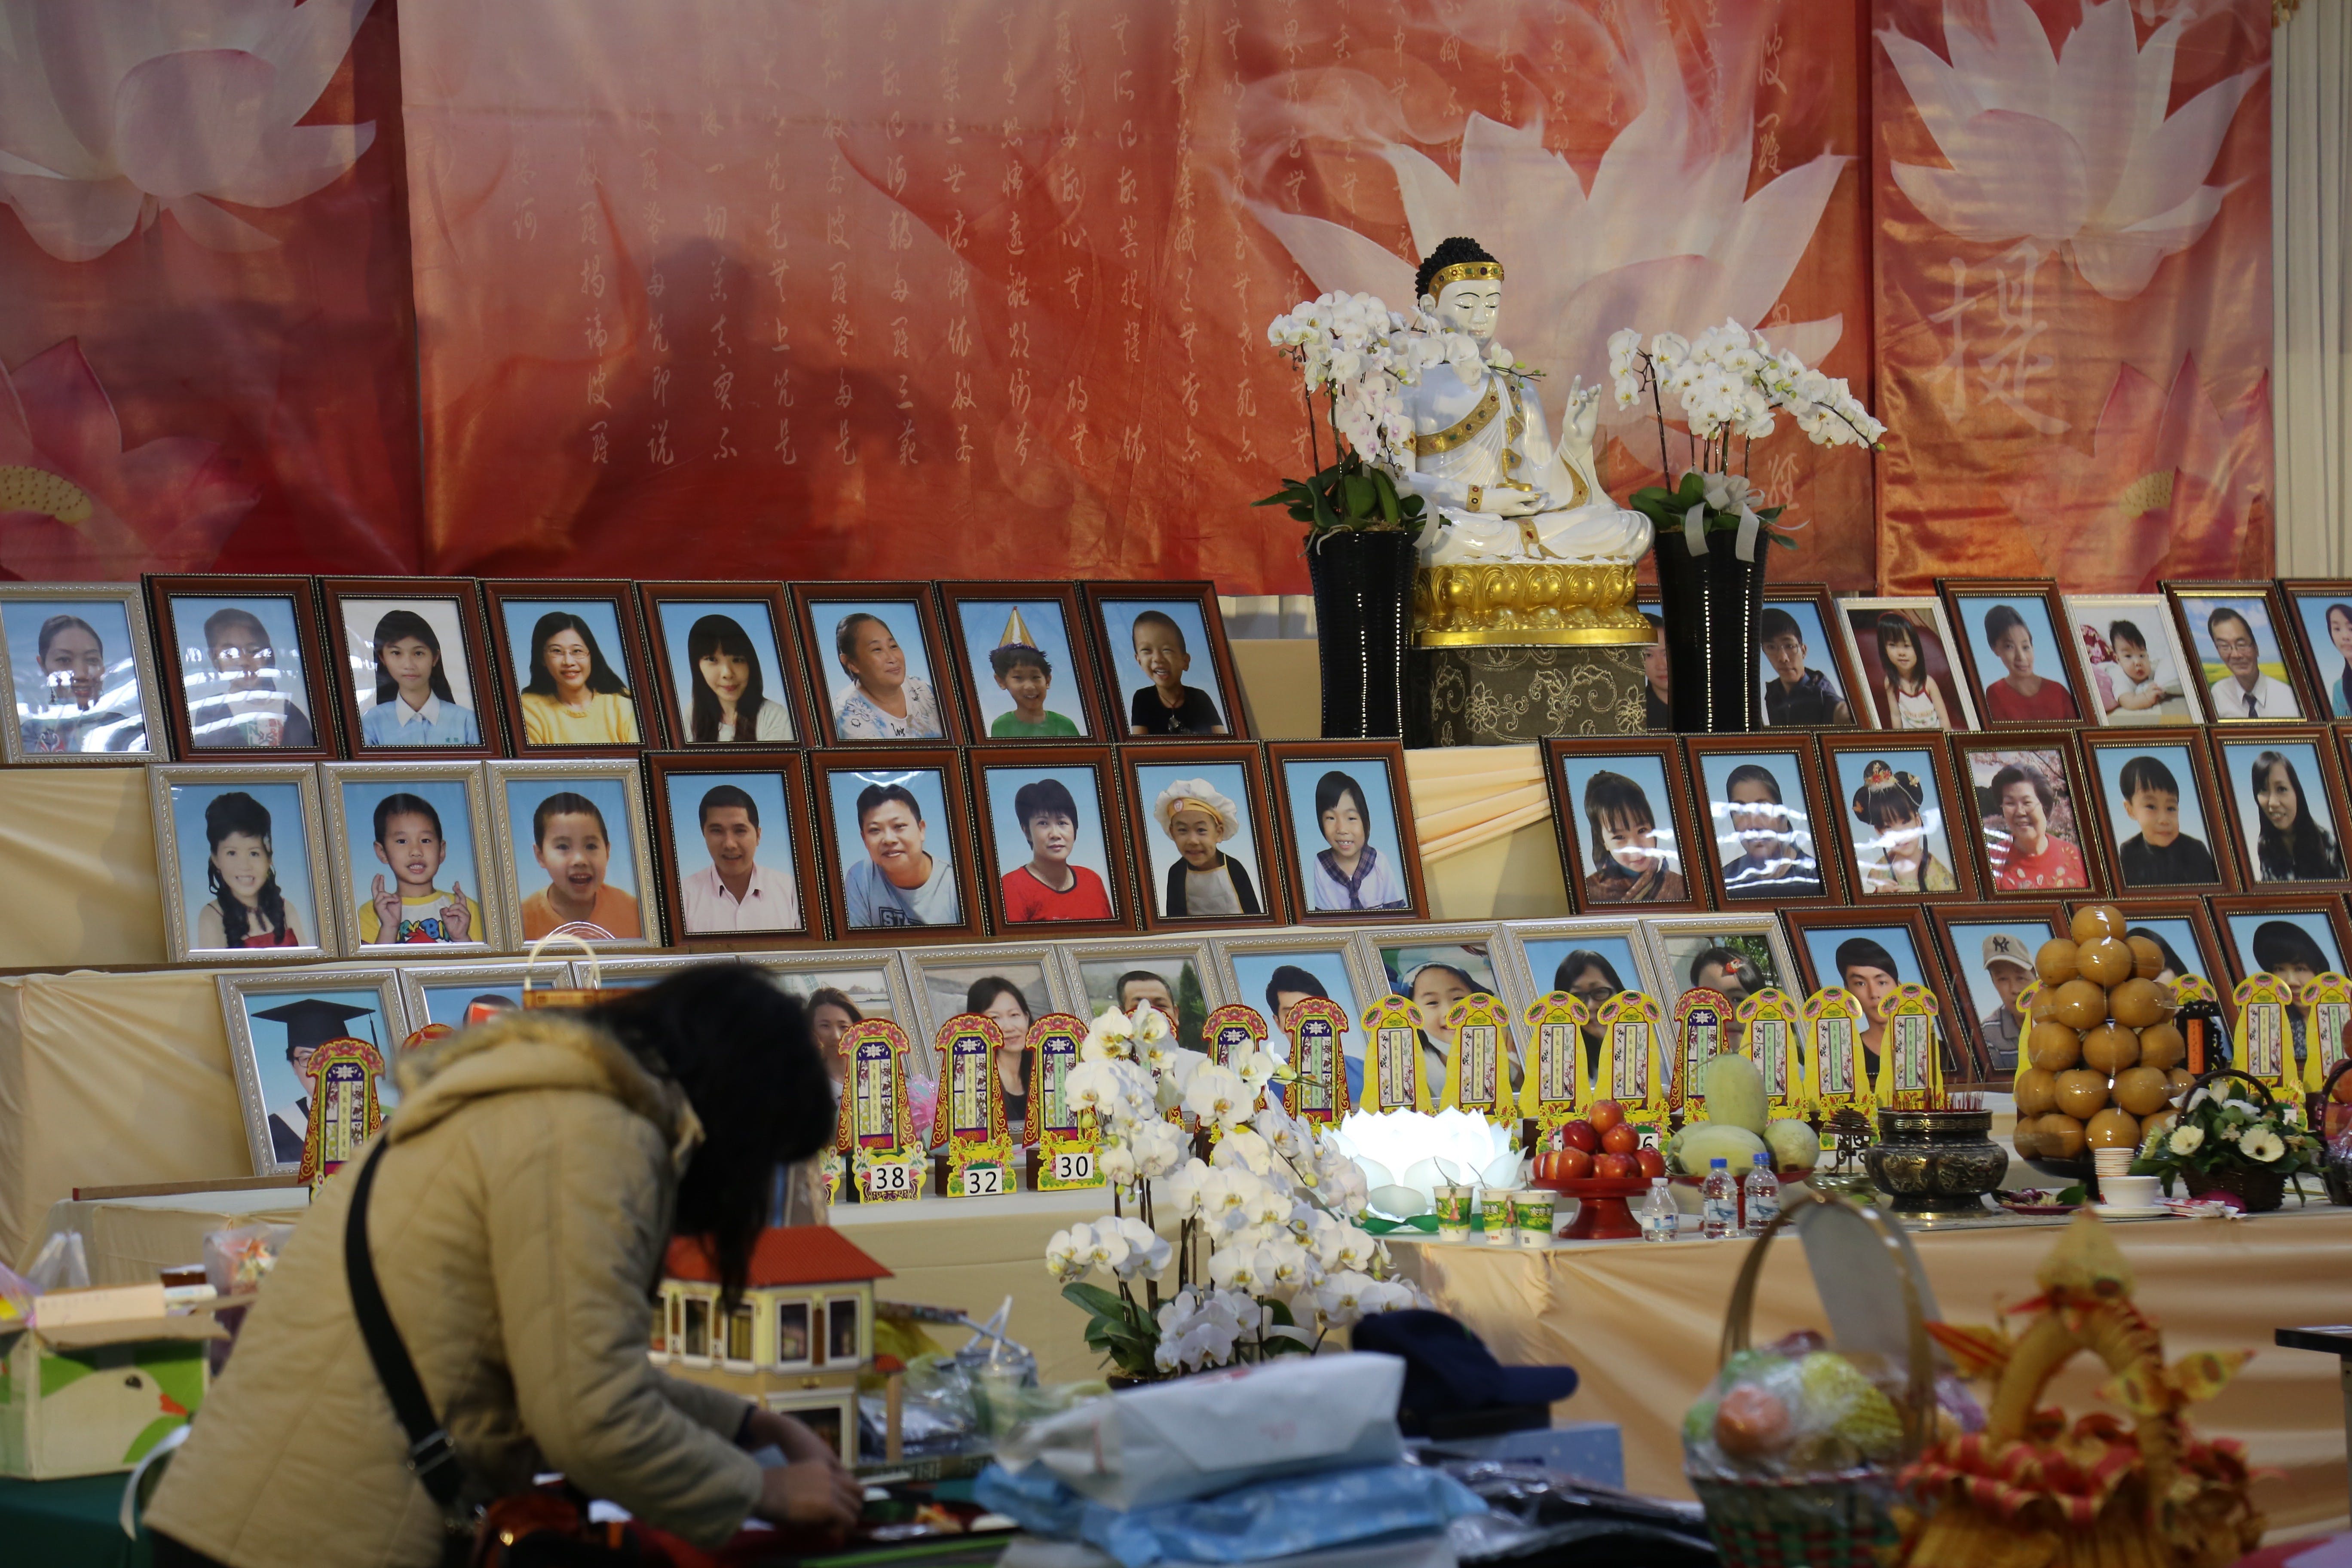 Photos of many of the 116 deceased victims of the Tainan City earthquake. Many victims were children and college students. Photo Credit: Tony Coolidge